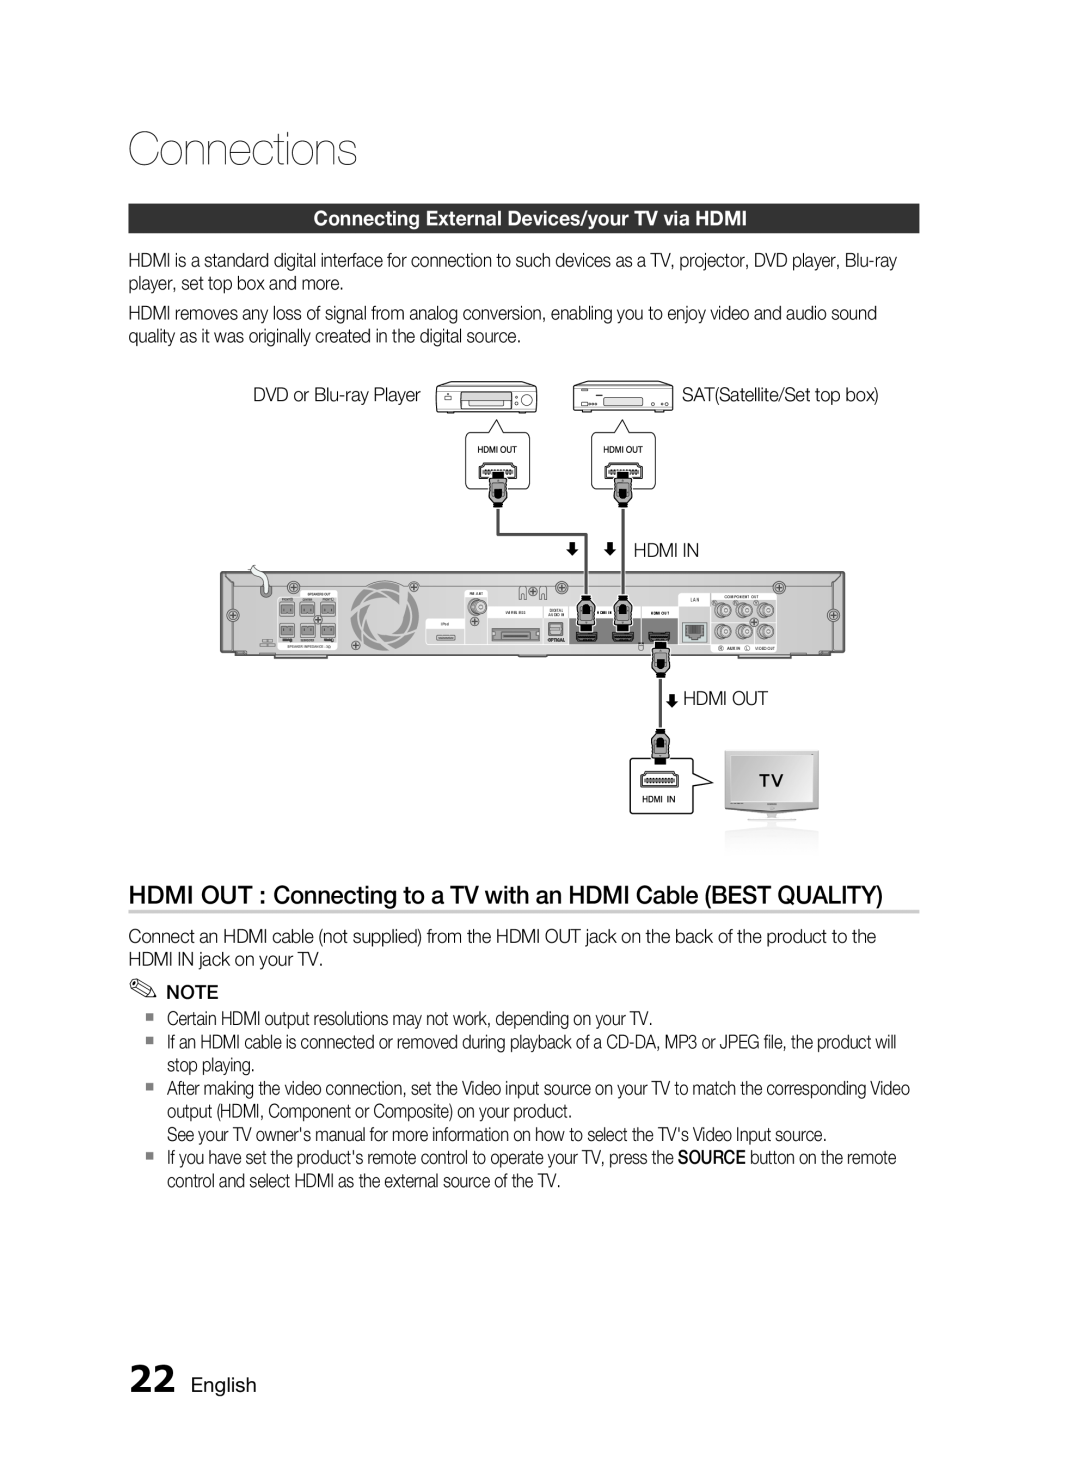 Samsung AH68-02255S, HT-C6530 user manual Connecting External Devices/your TV via HDMI, English, Connections 